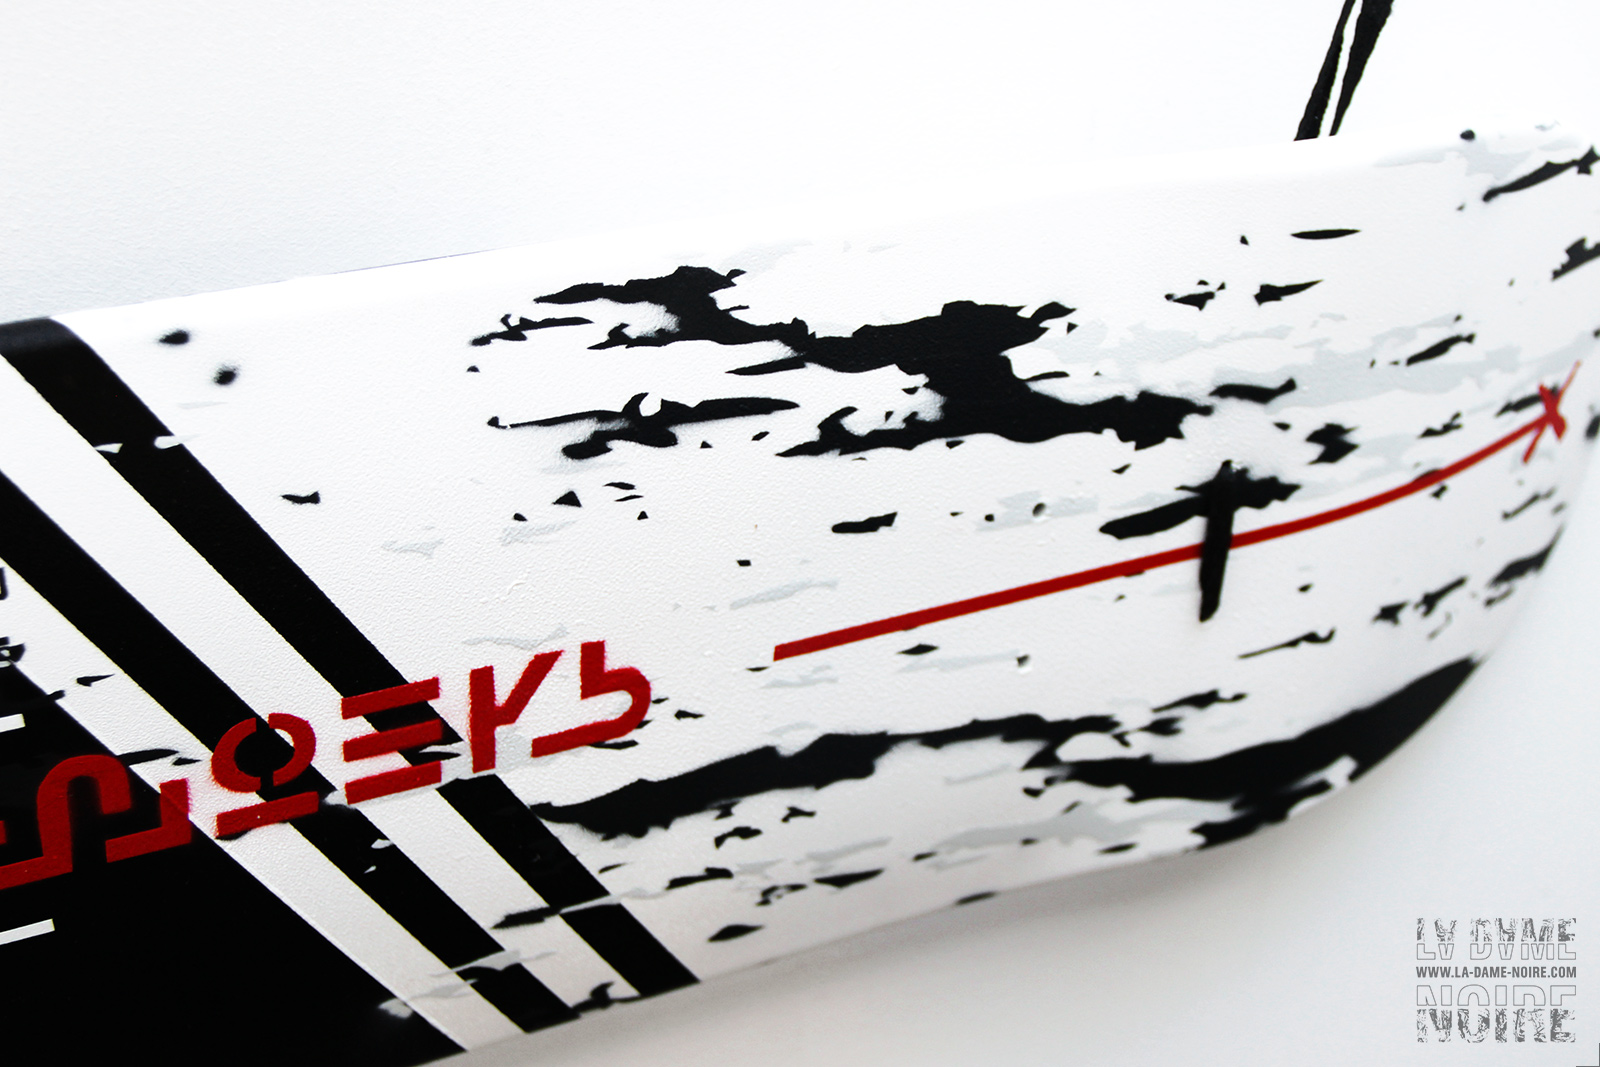 Details of the skateboard with red letters on white paint